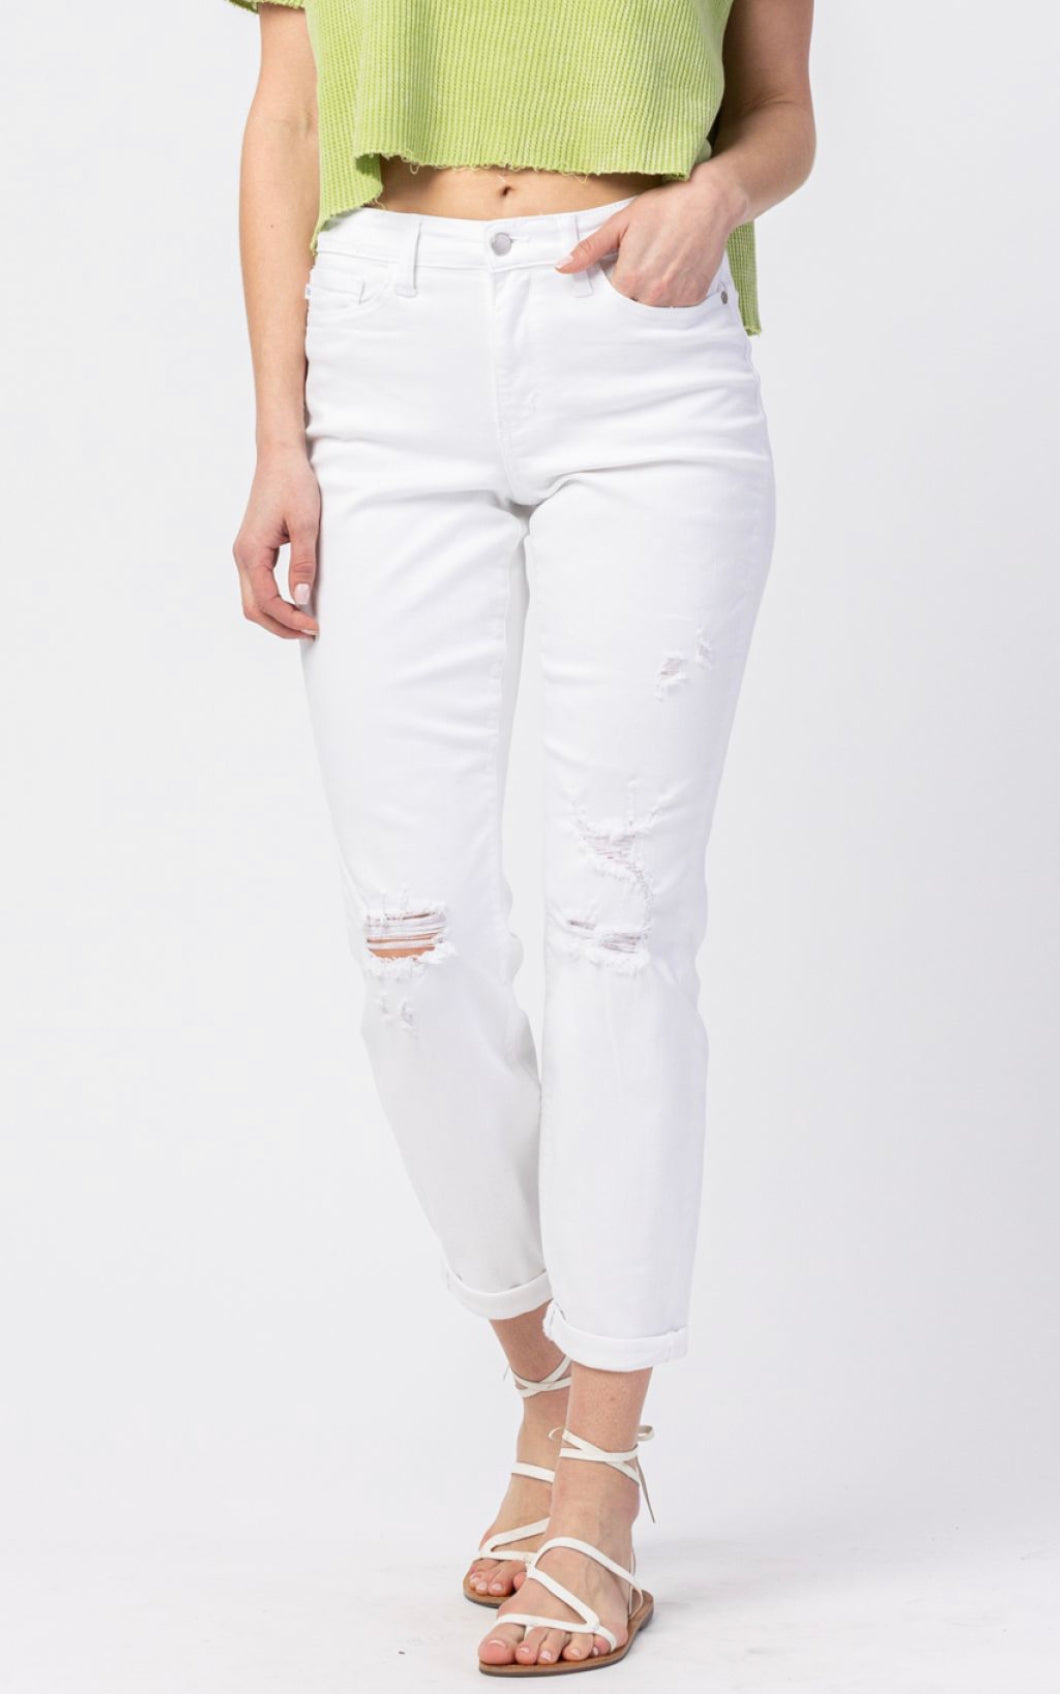 The New Boyfriend Jeans from Judy Blue